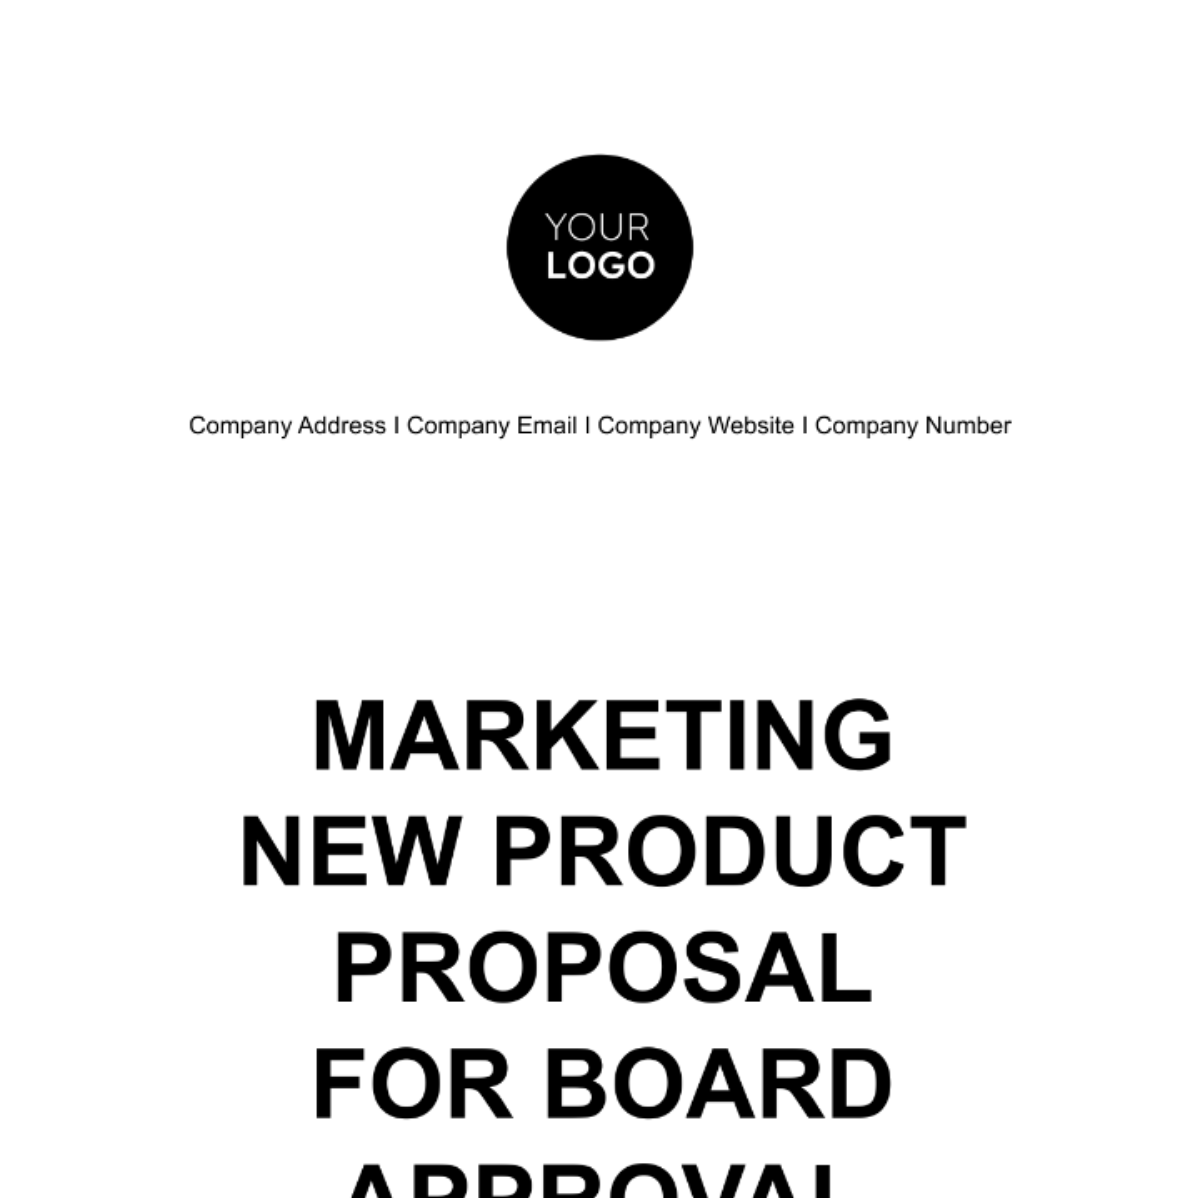 Marketing New Product Proposal for Board Approval Template